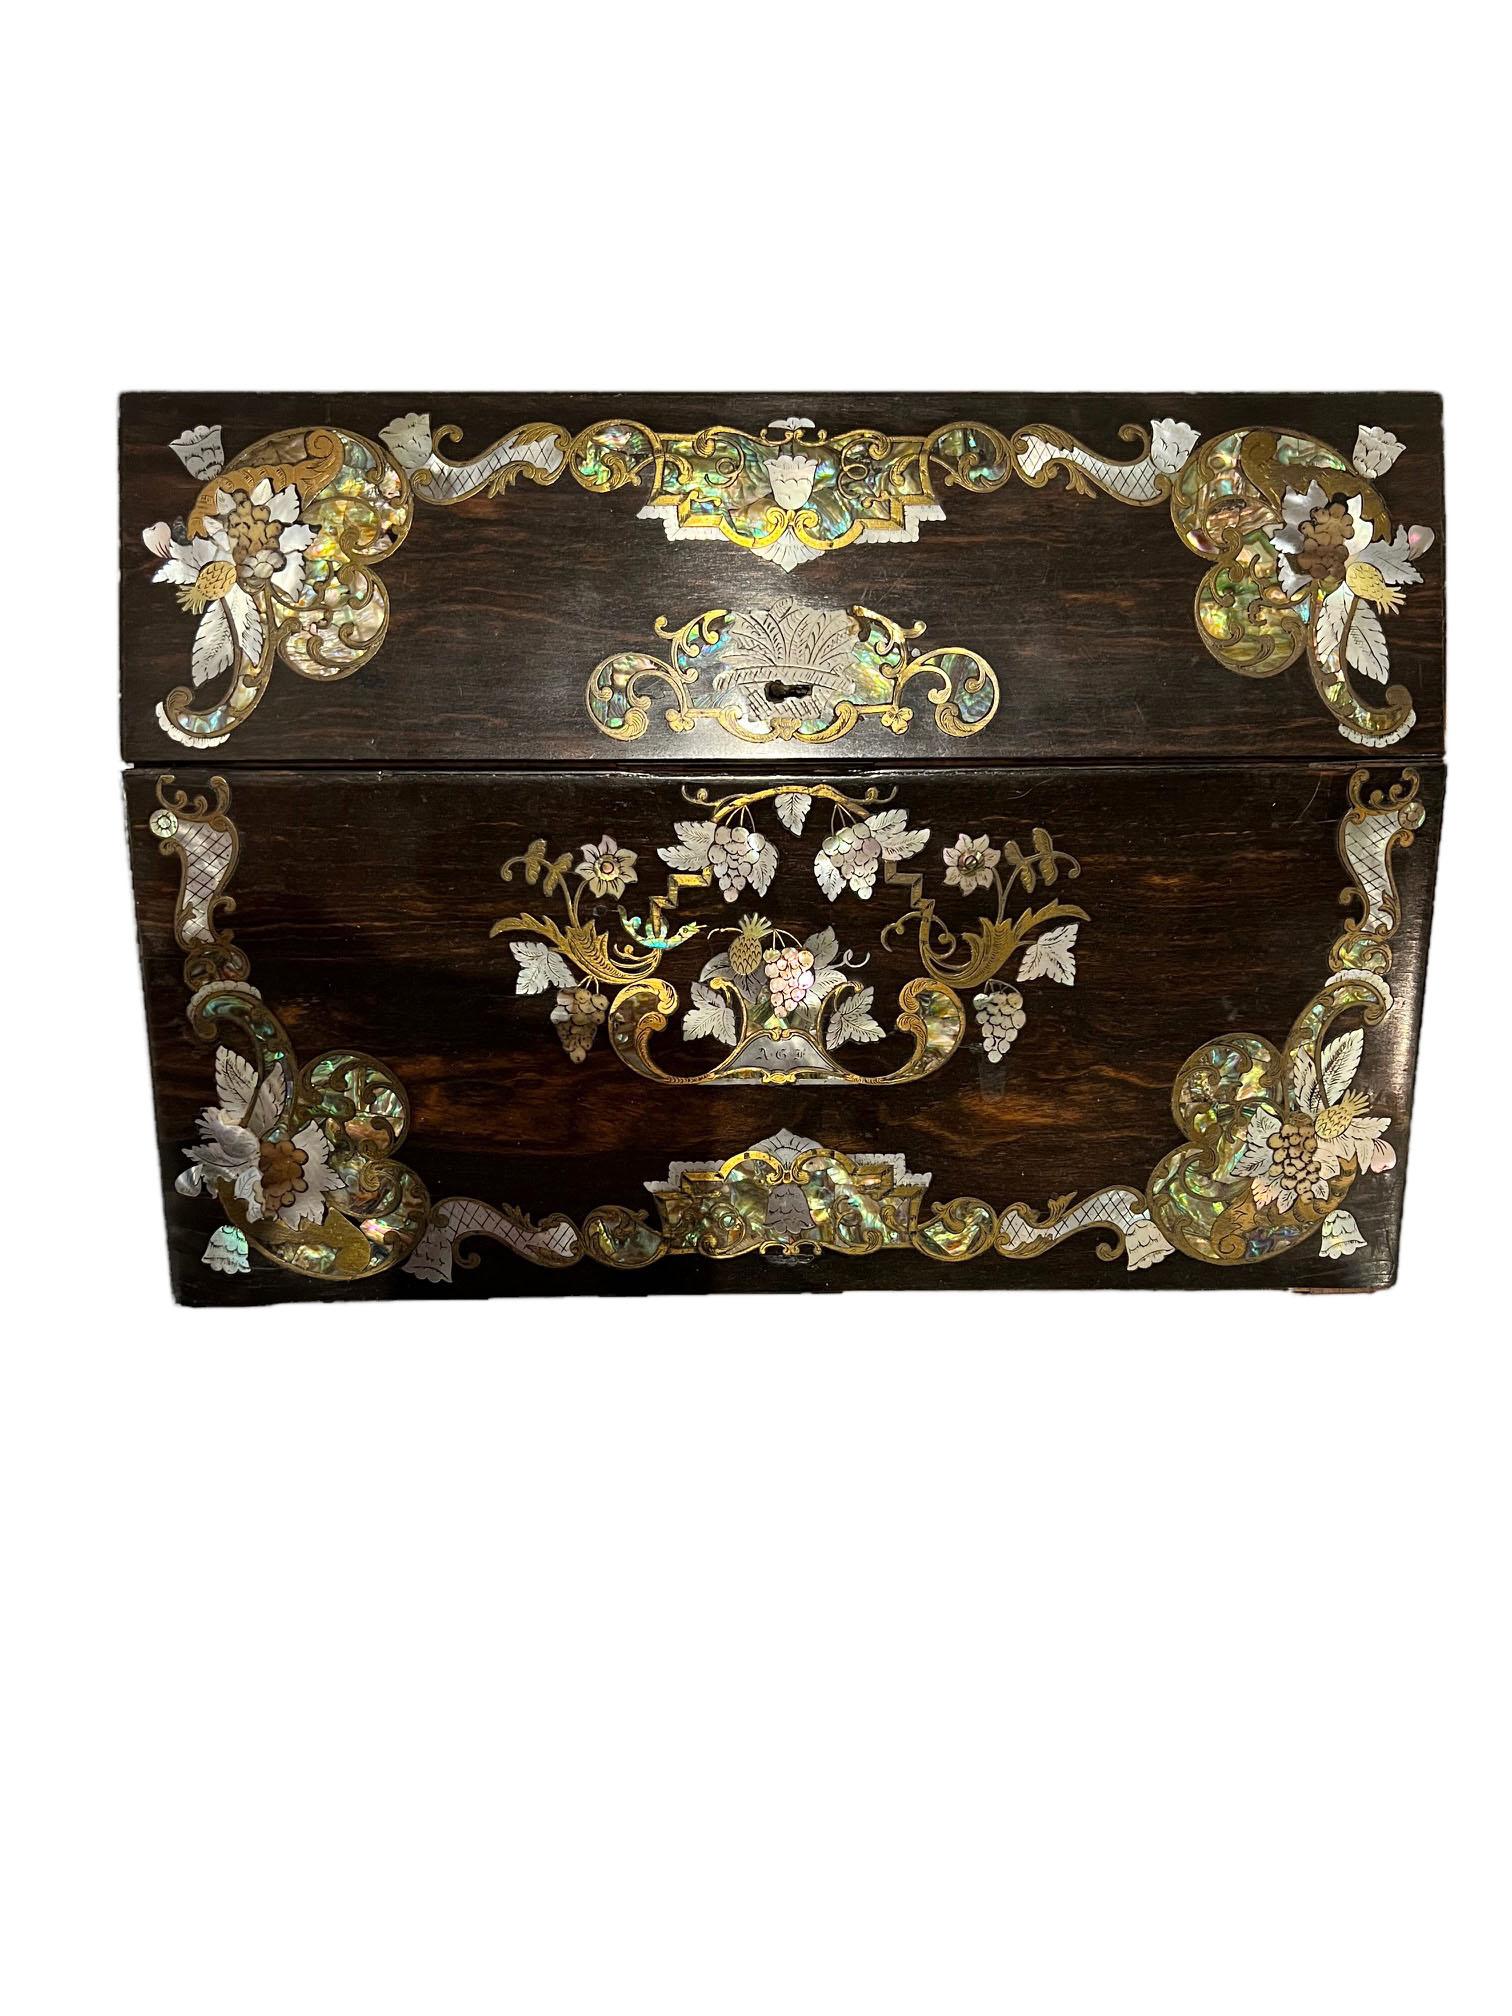 Leather English Writing Desk With Mother Of Pearl And Abalone For Sale